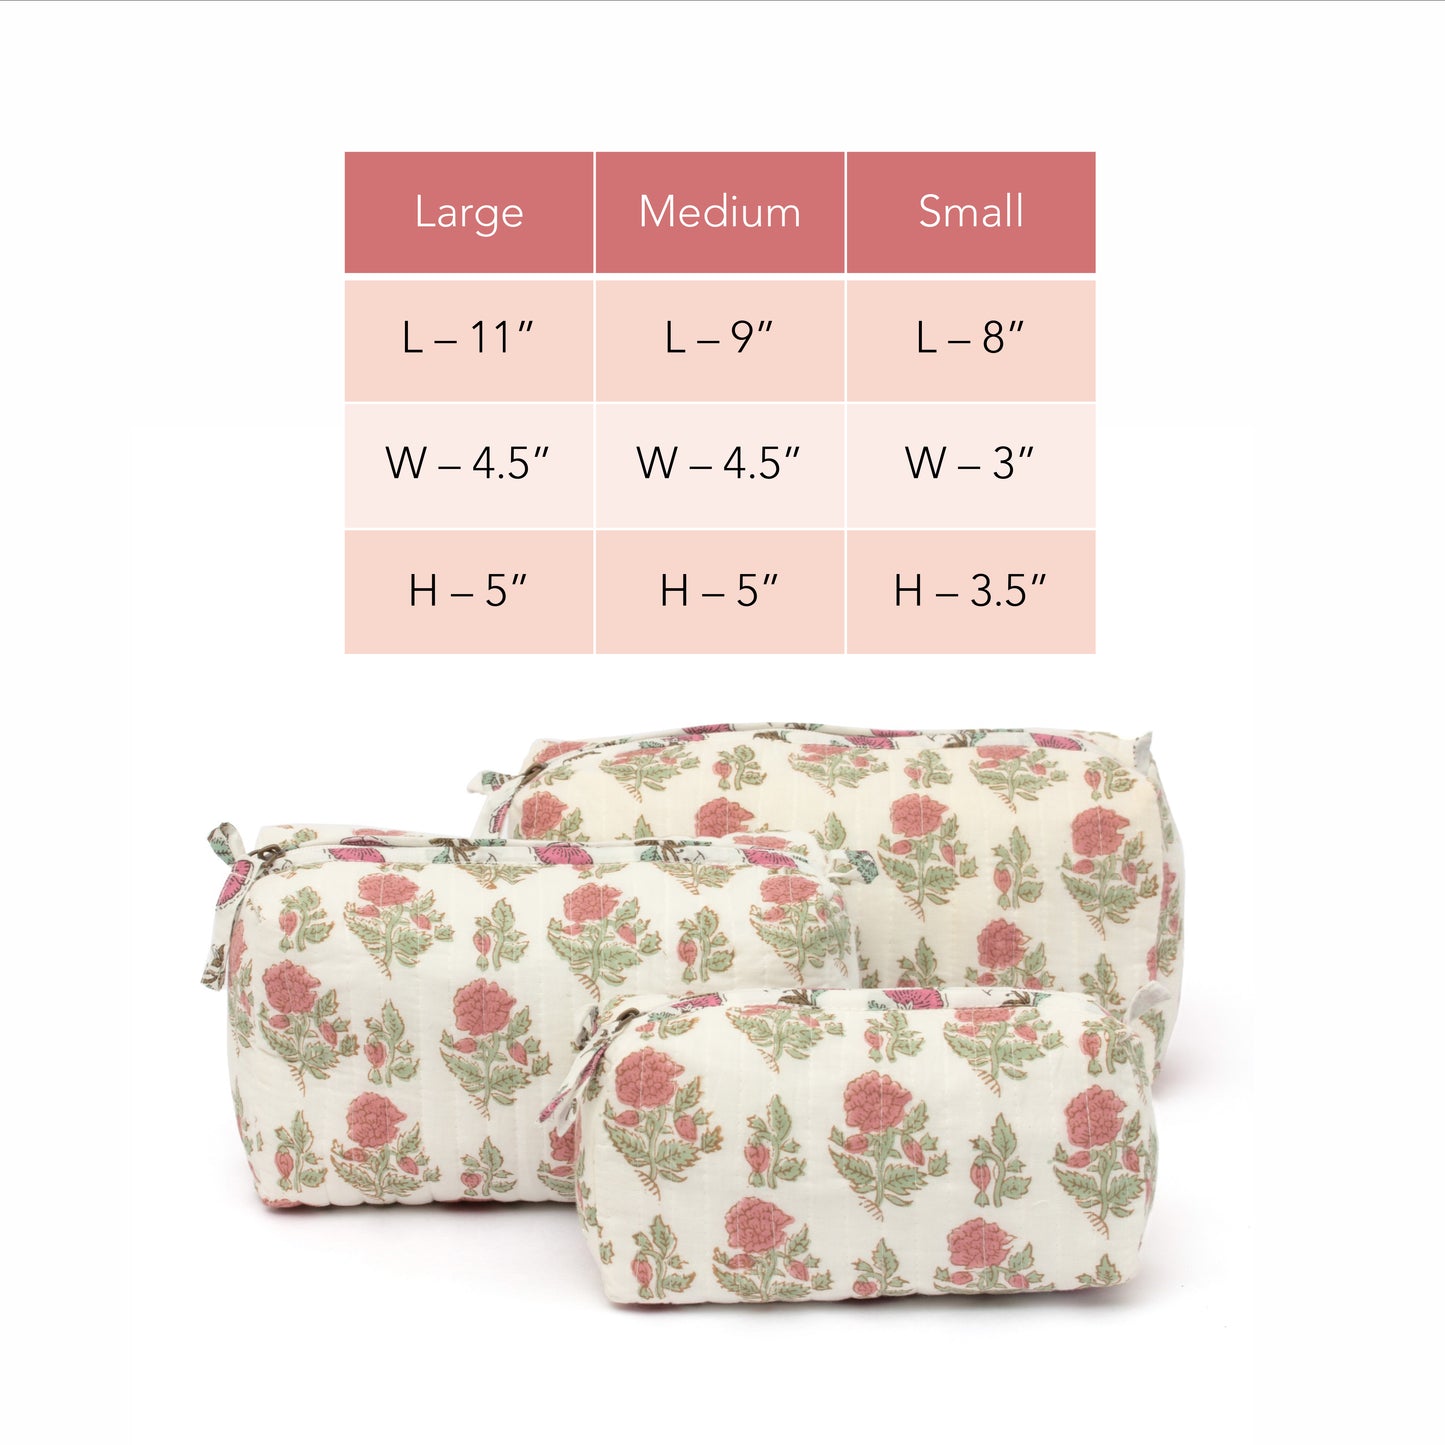 White Bloom Travel Pouch